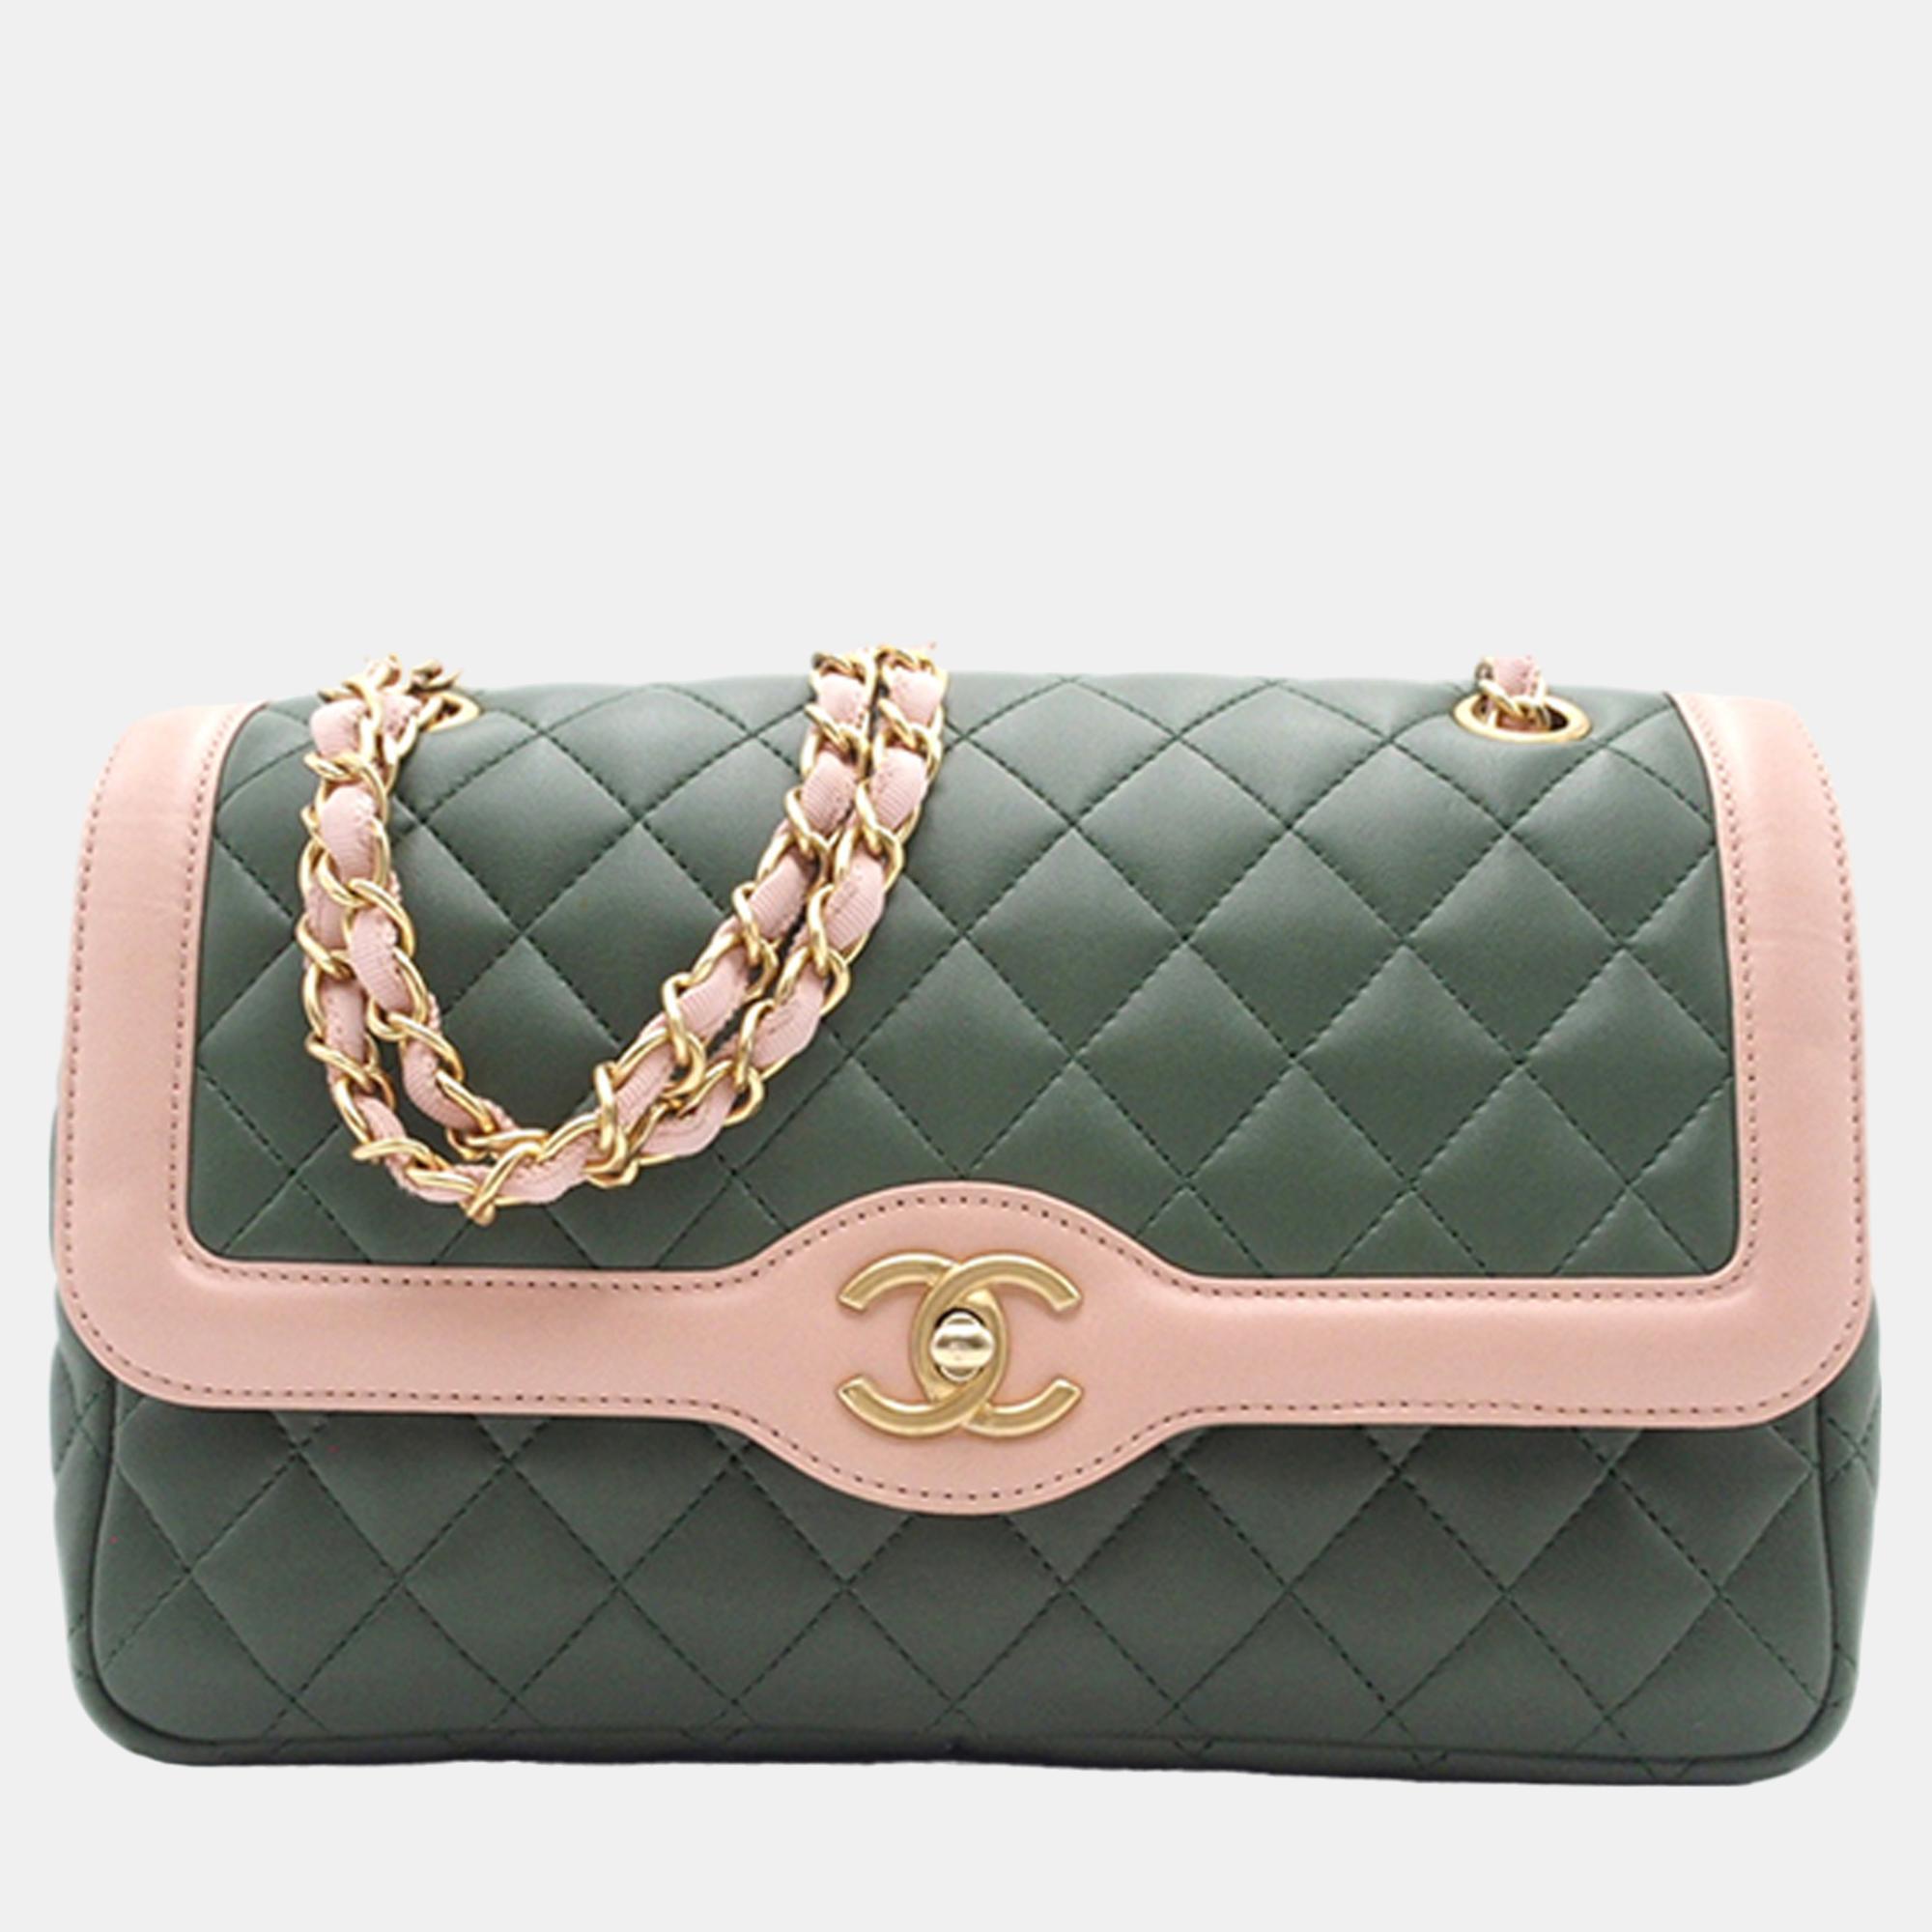 Chanel green cc quilted lambskin two-tone flap